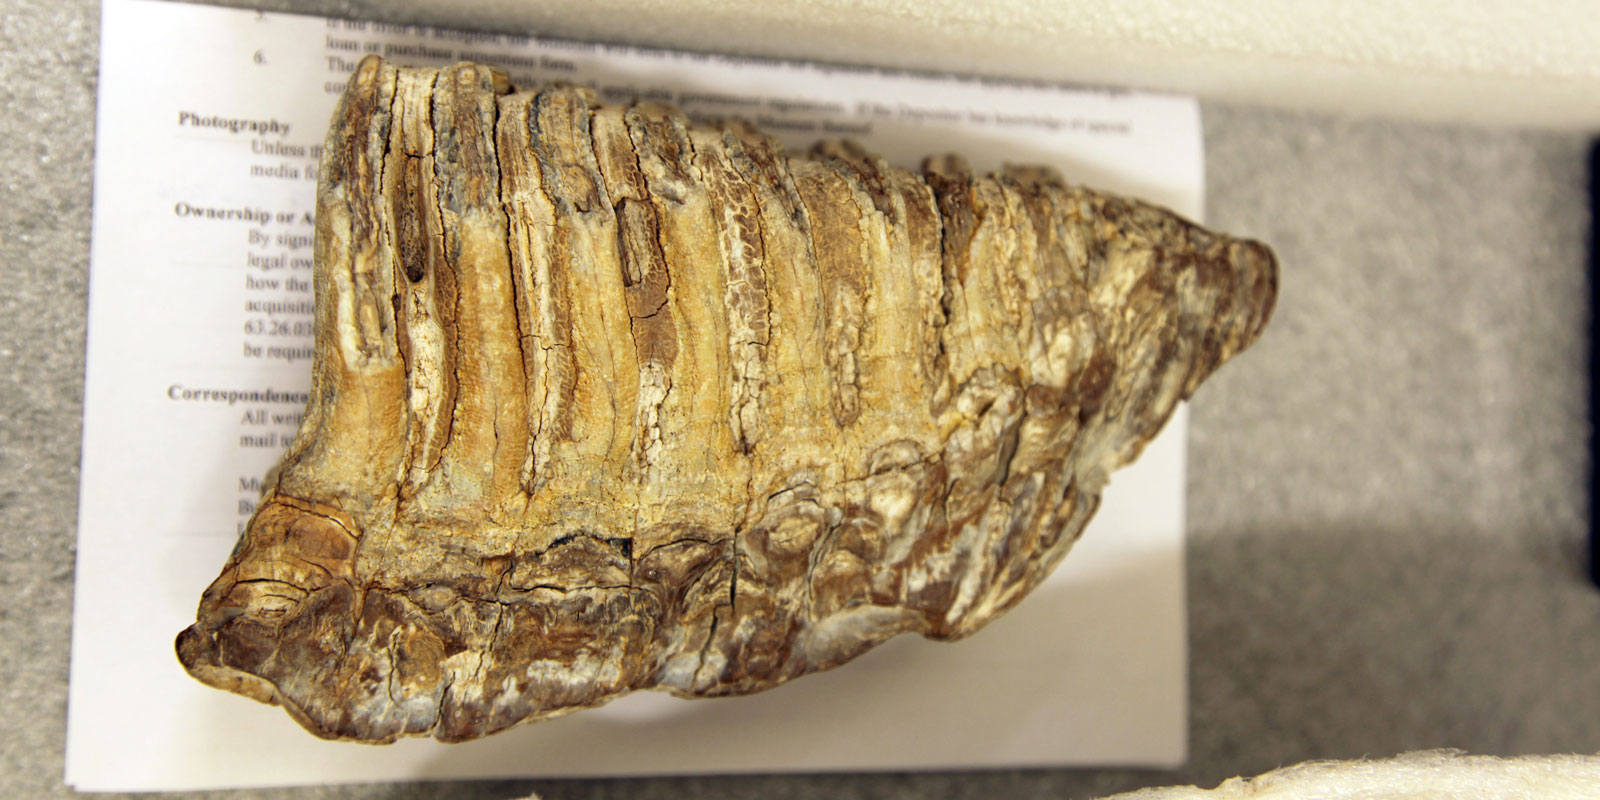 A close up view of the mammoth tooth